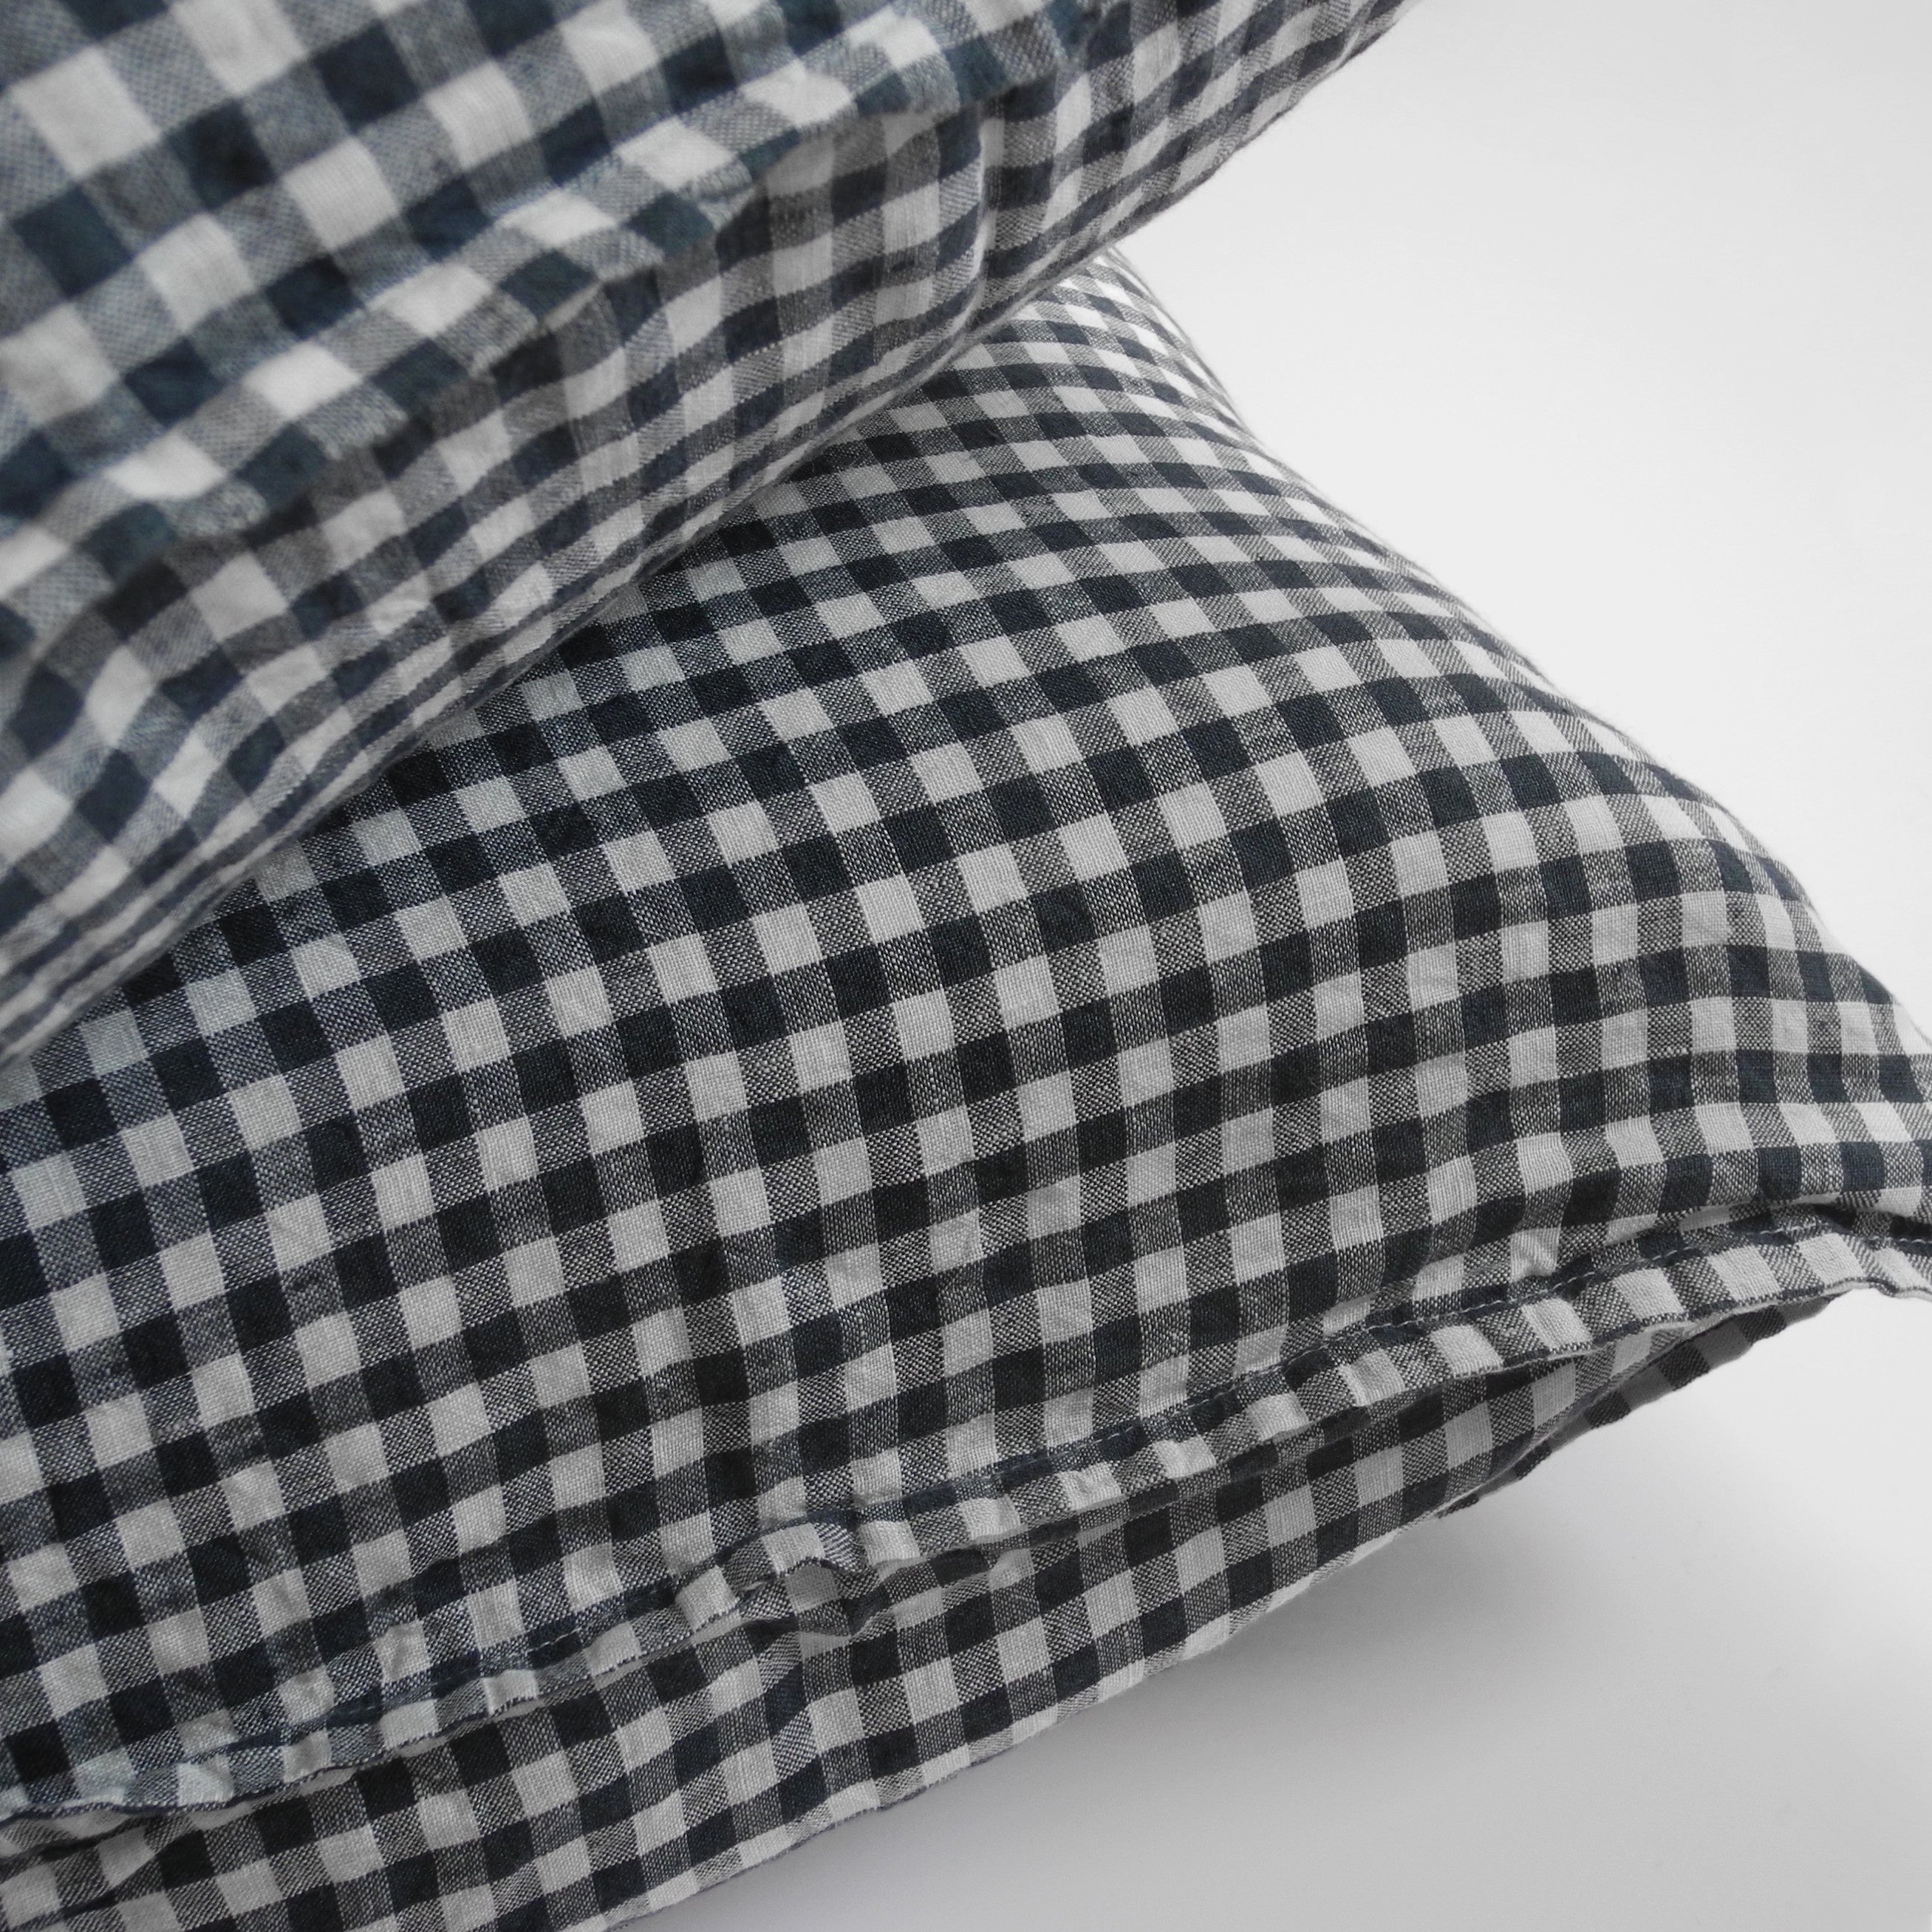 Linen Euro Pillowcase, anthracite gingham, Pillowcase, Linge Particulier, Collyer&#39;s Mansion - Collyer&#39;s Mansion